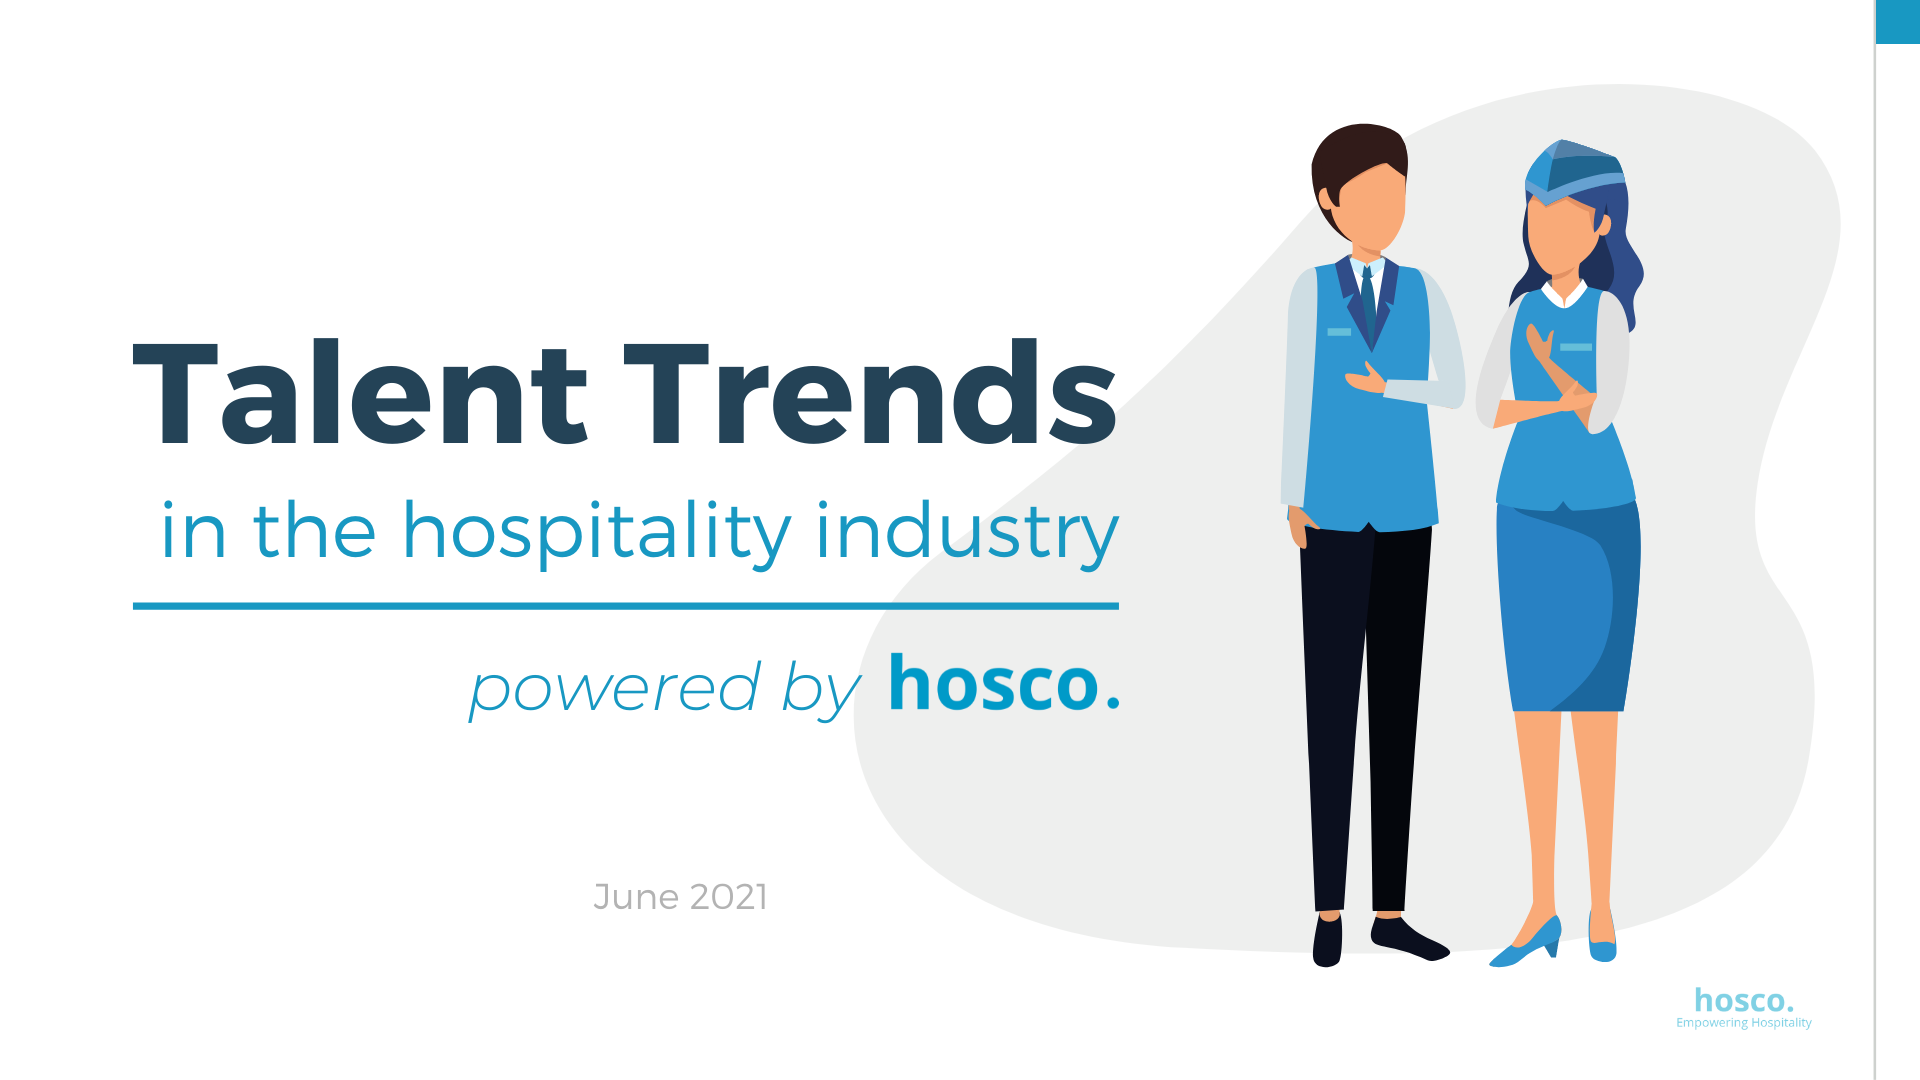 Report_Talent Trends in the Hospitality Industry_June 2021